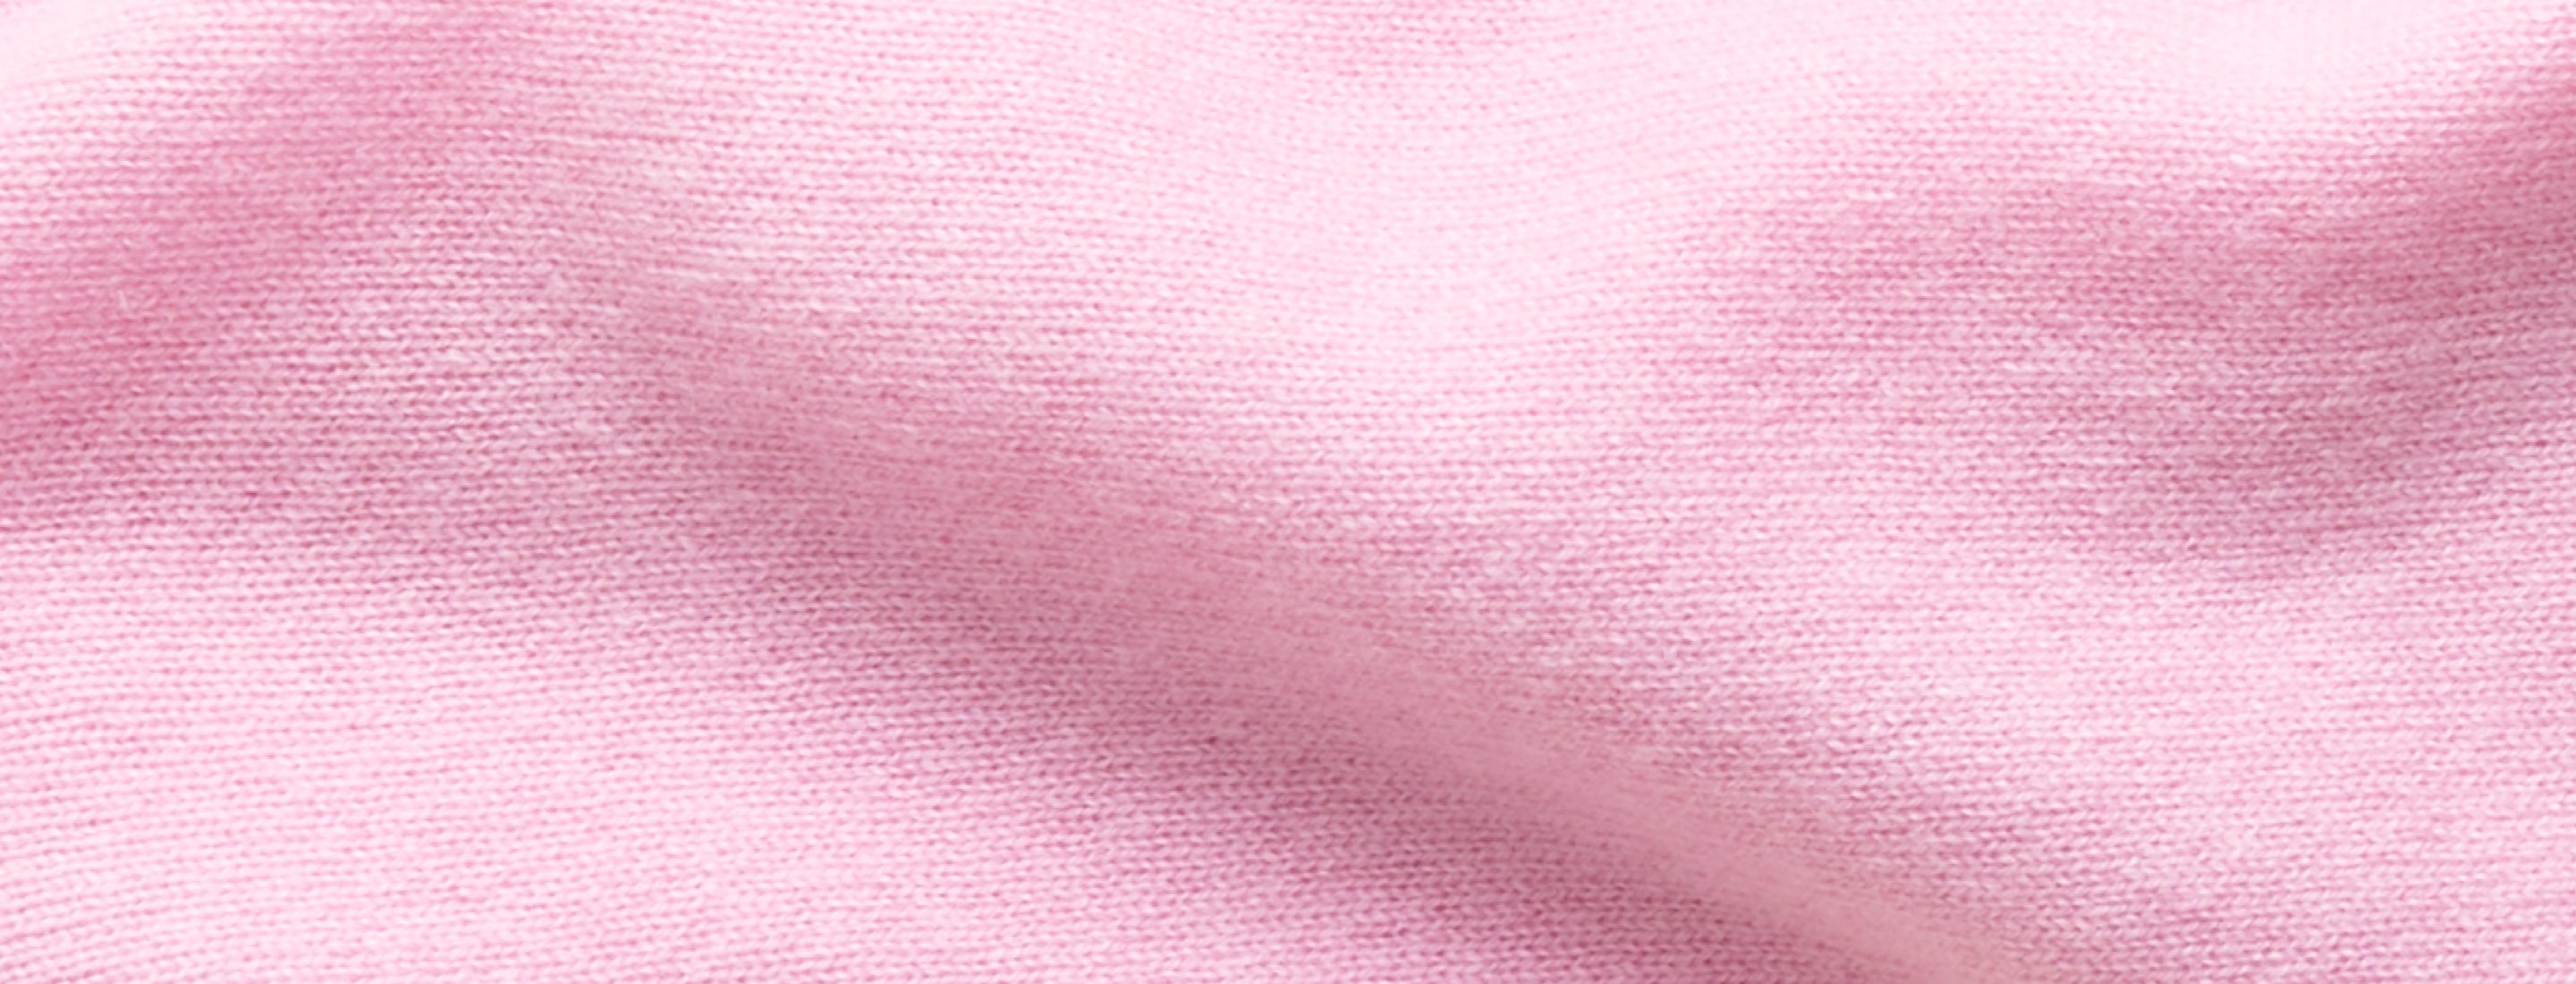 Pink cashmere fabric 